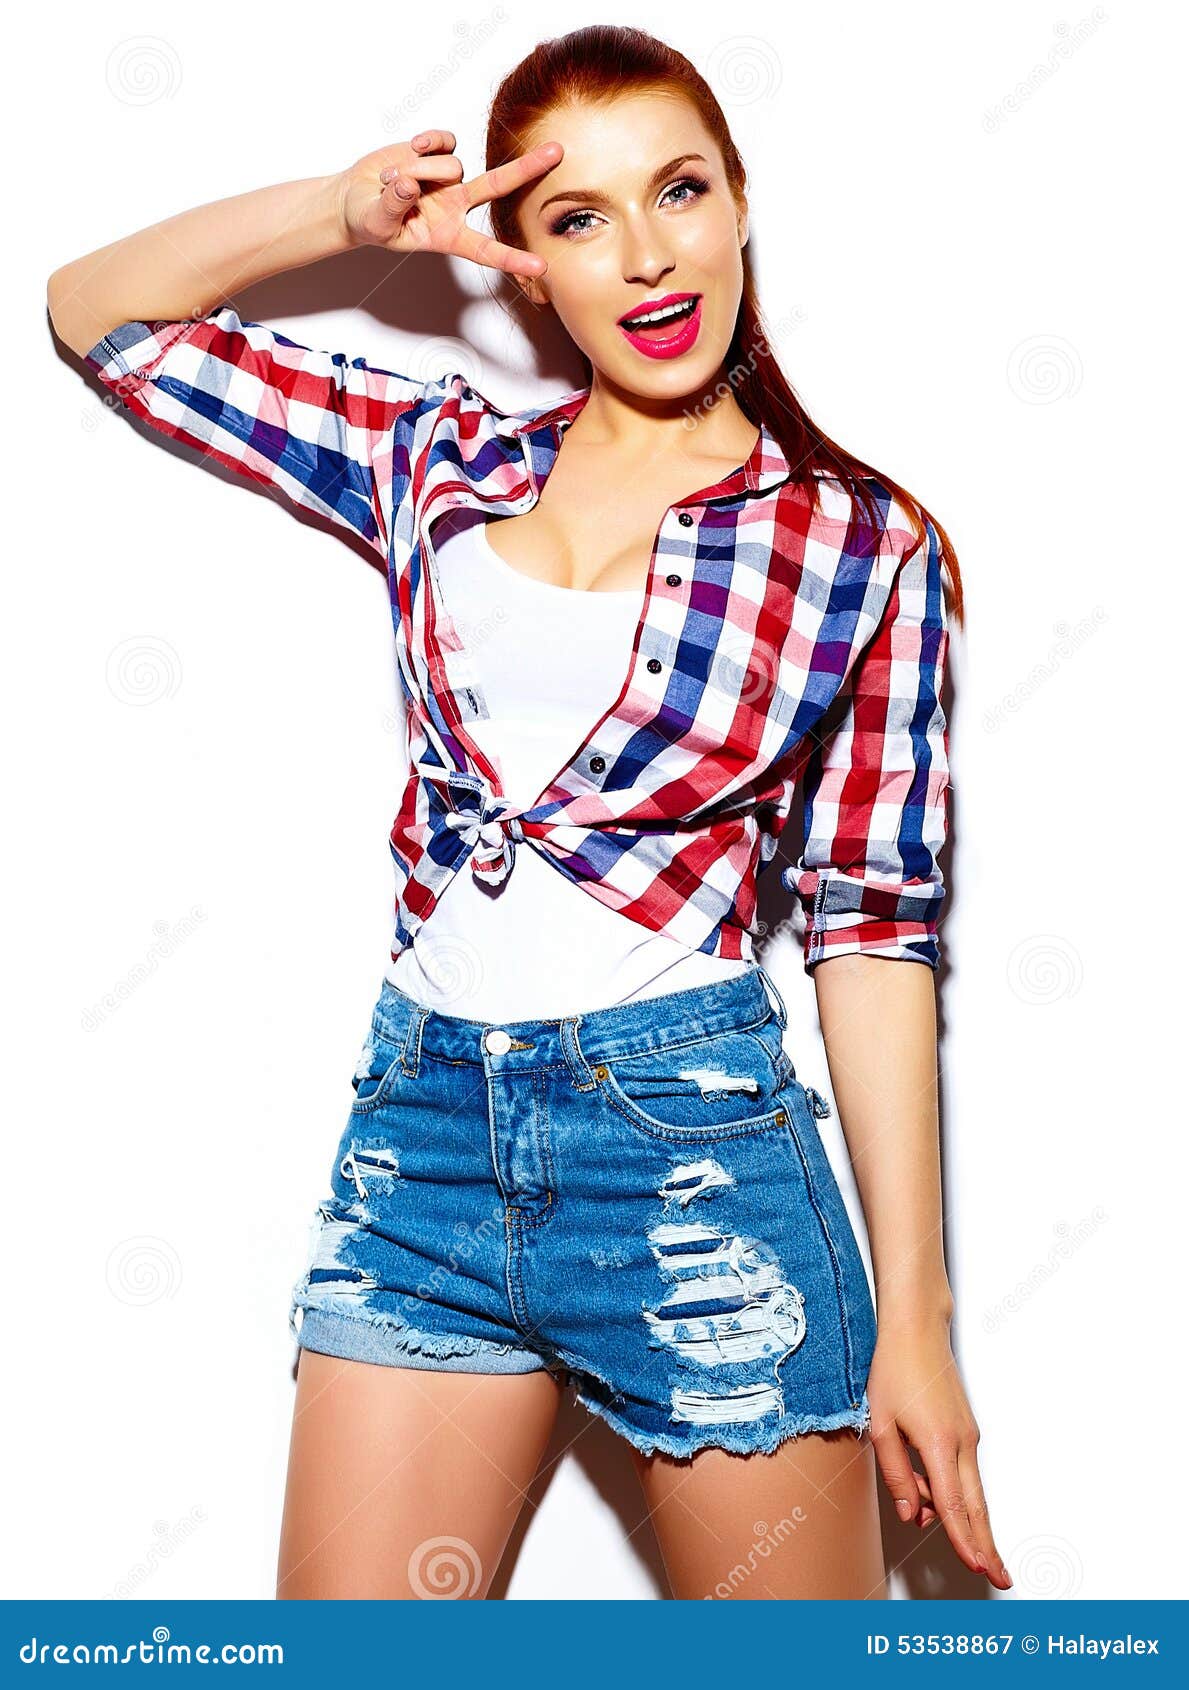 Funny Stylish Model Girl in Casual Modern Hipster Cloth Stock Image ...